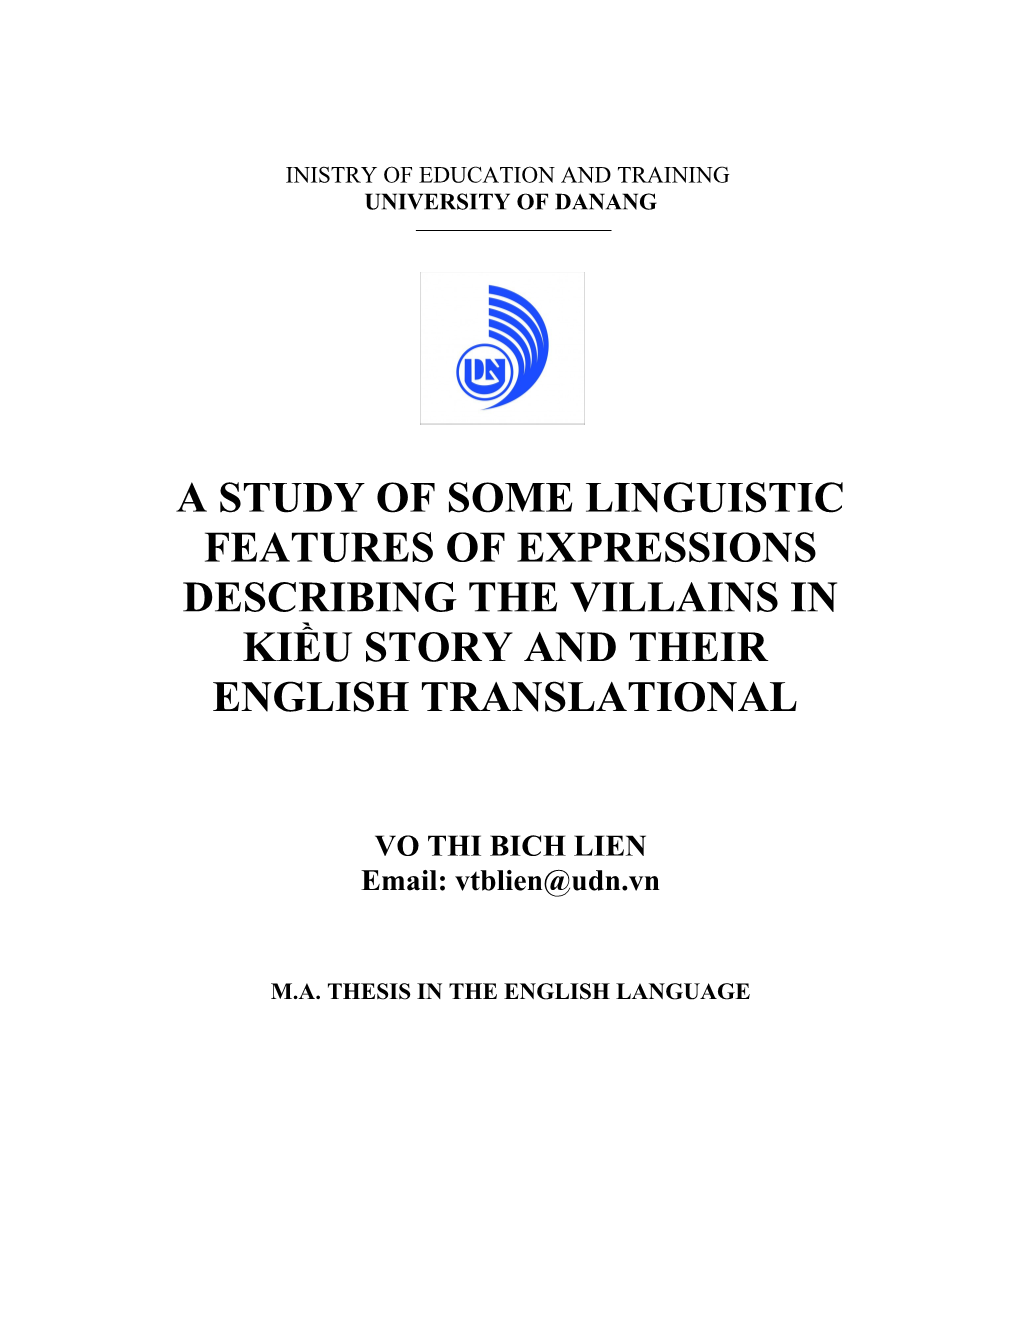 A Study of Some Linguistic Features of Expressions Describing the Villains in Kiều Story